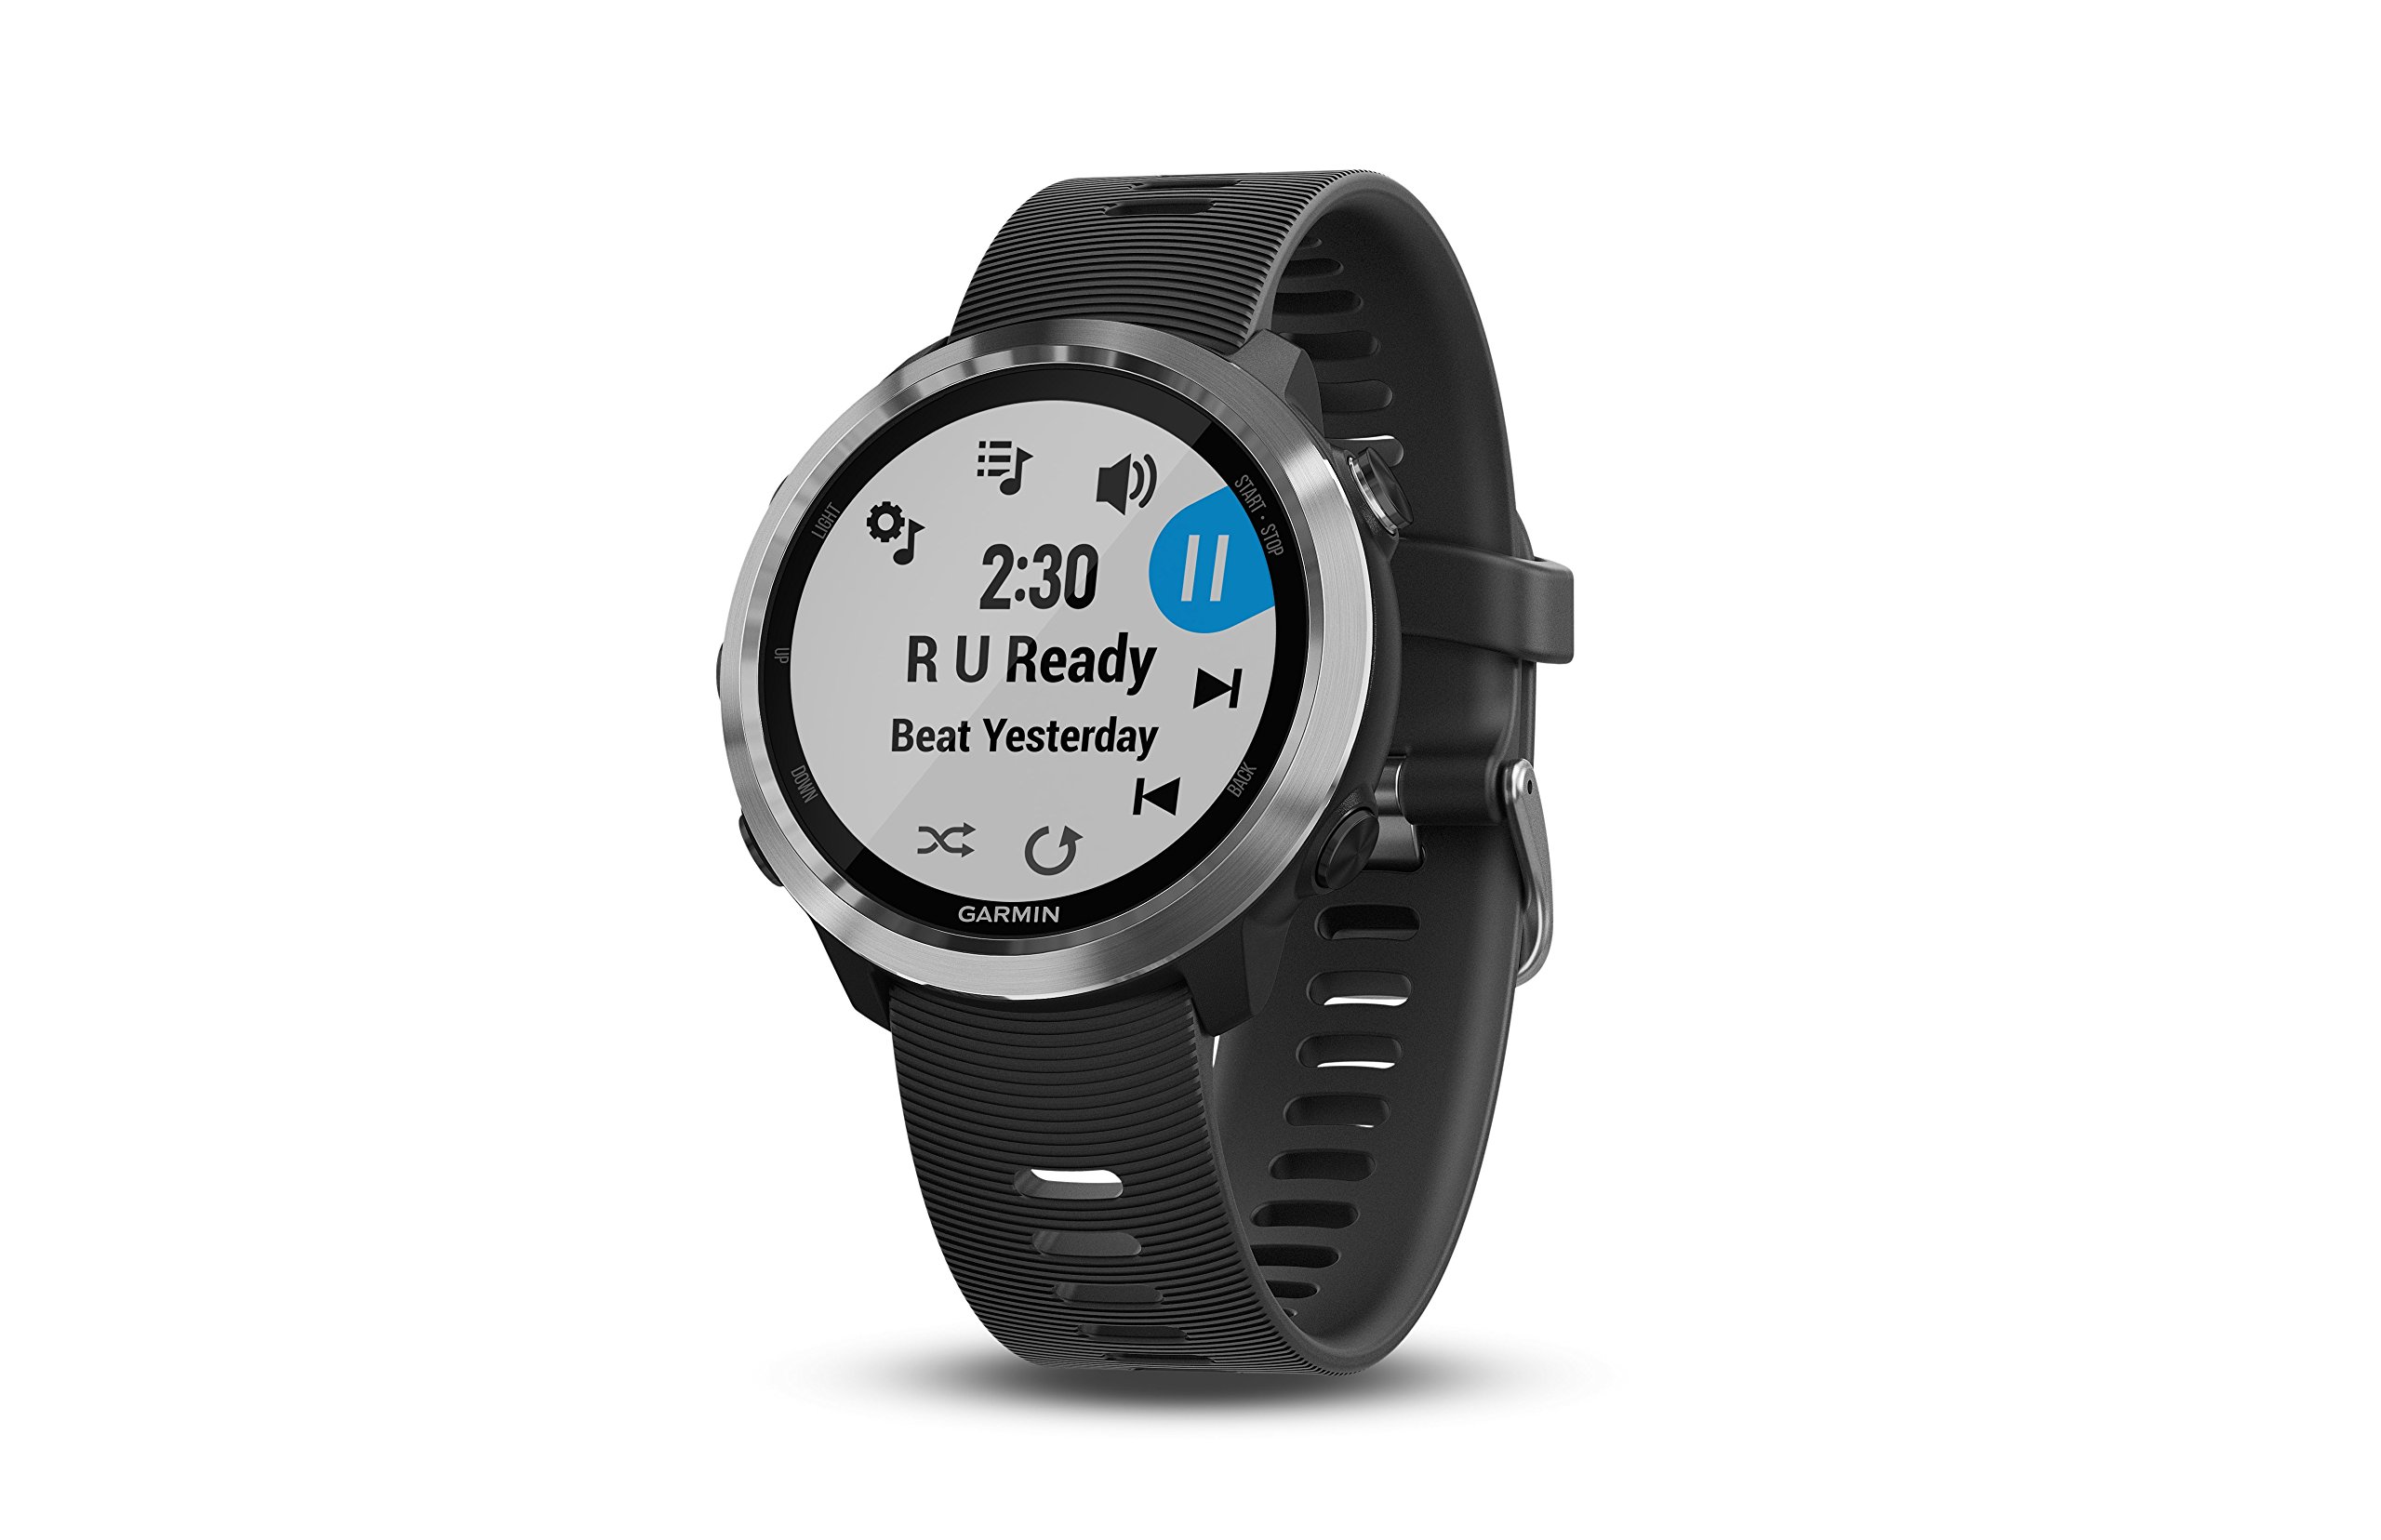 Garmin Forerunner 645 Music, GPS Running Watch With Pay Contactless Payments, Wrist-Based Heart Rate And Music, Black